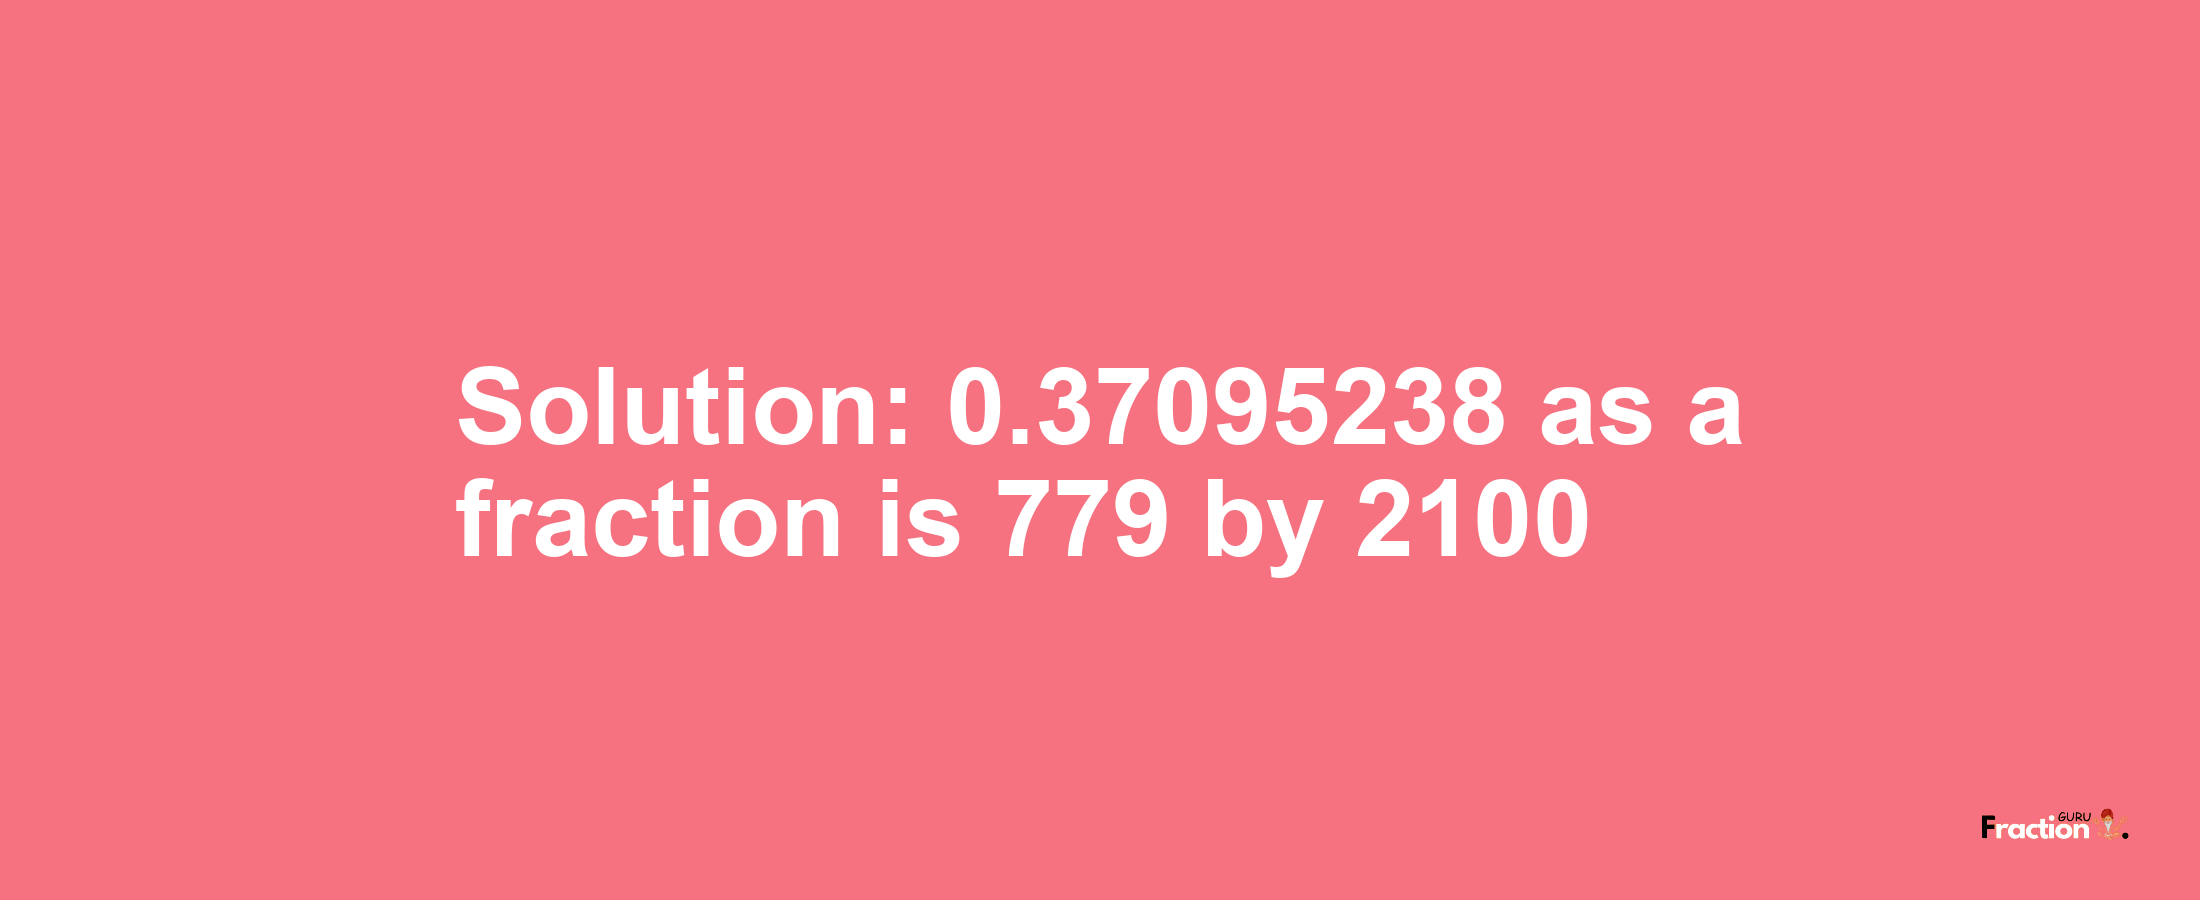 Solution:0.37095238 as a fraction is 779/2100